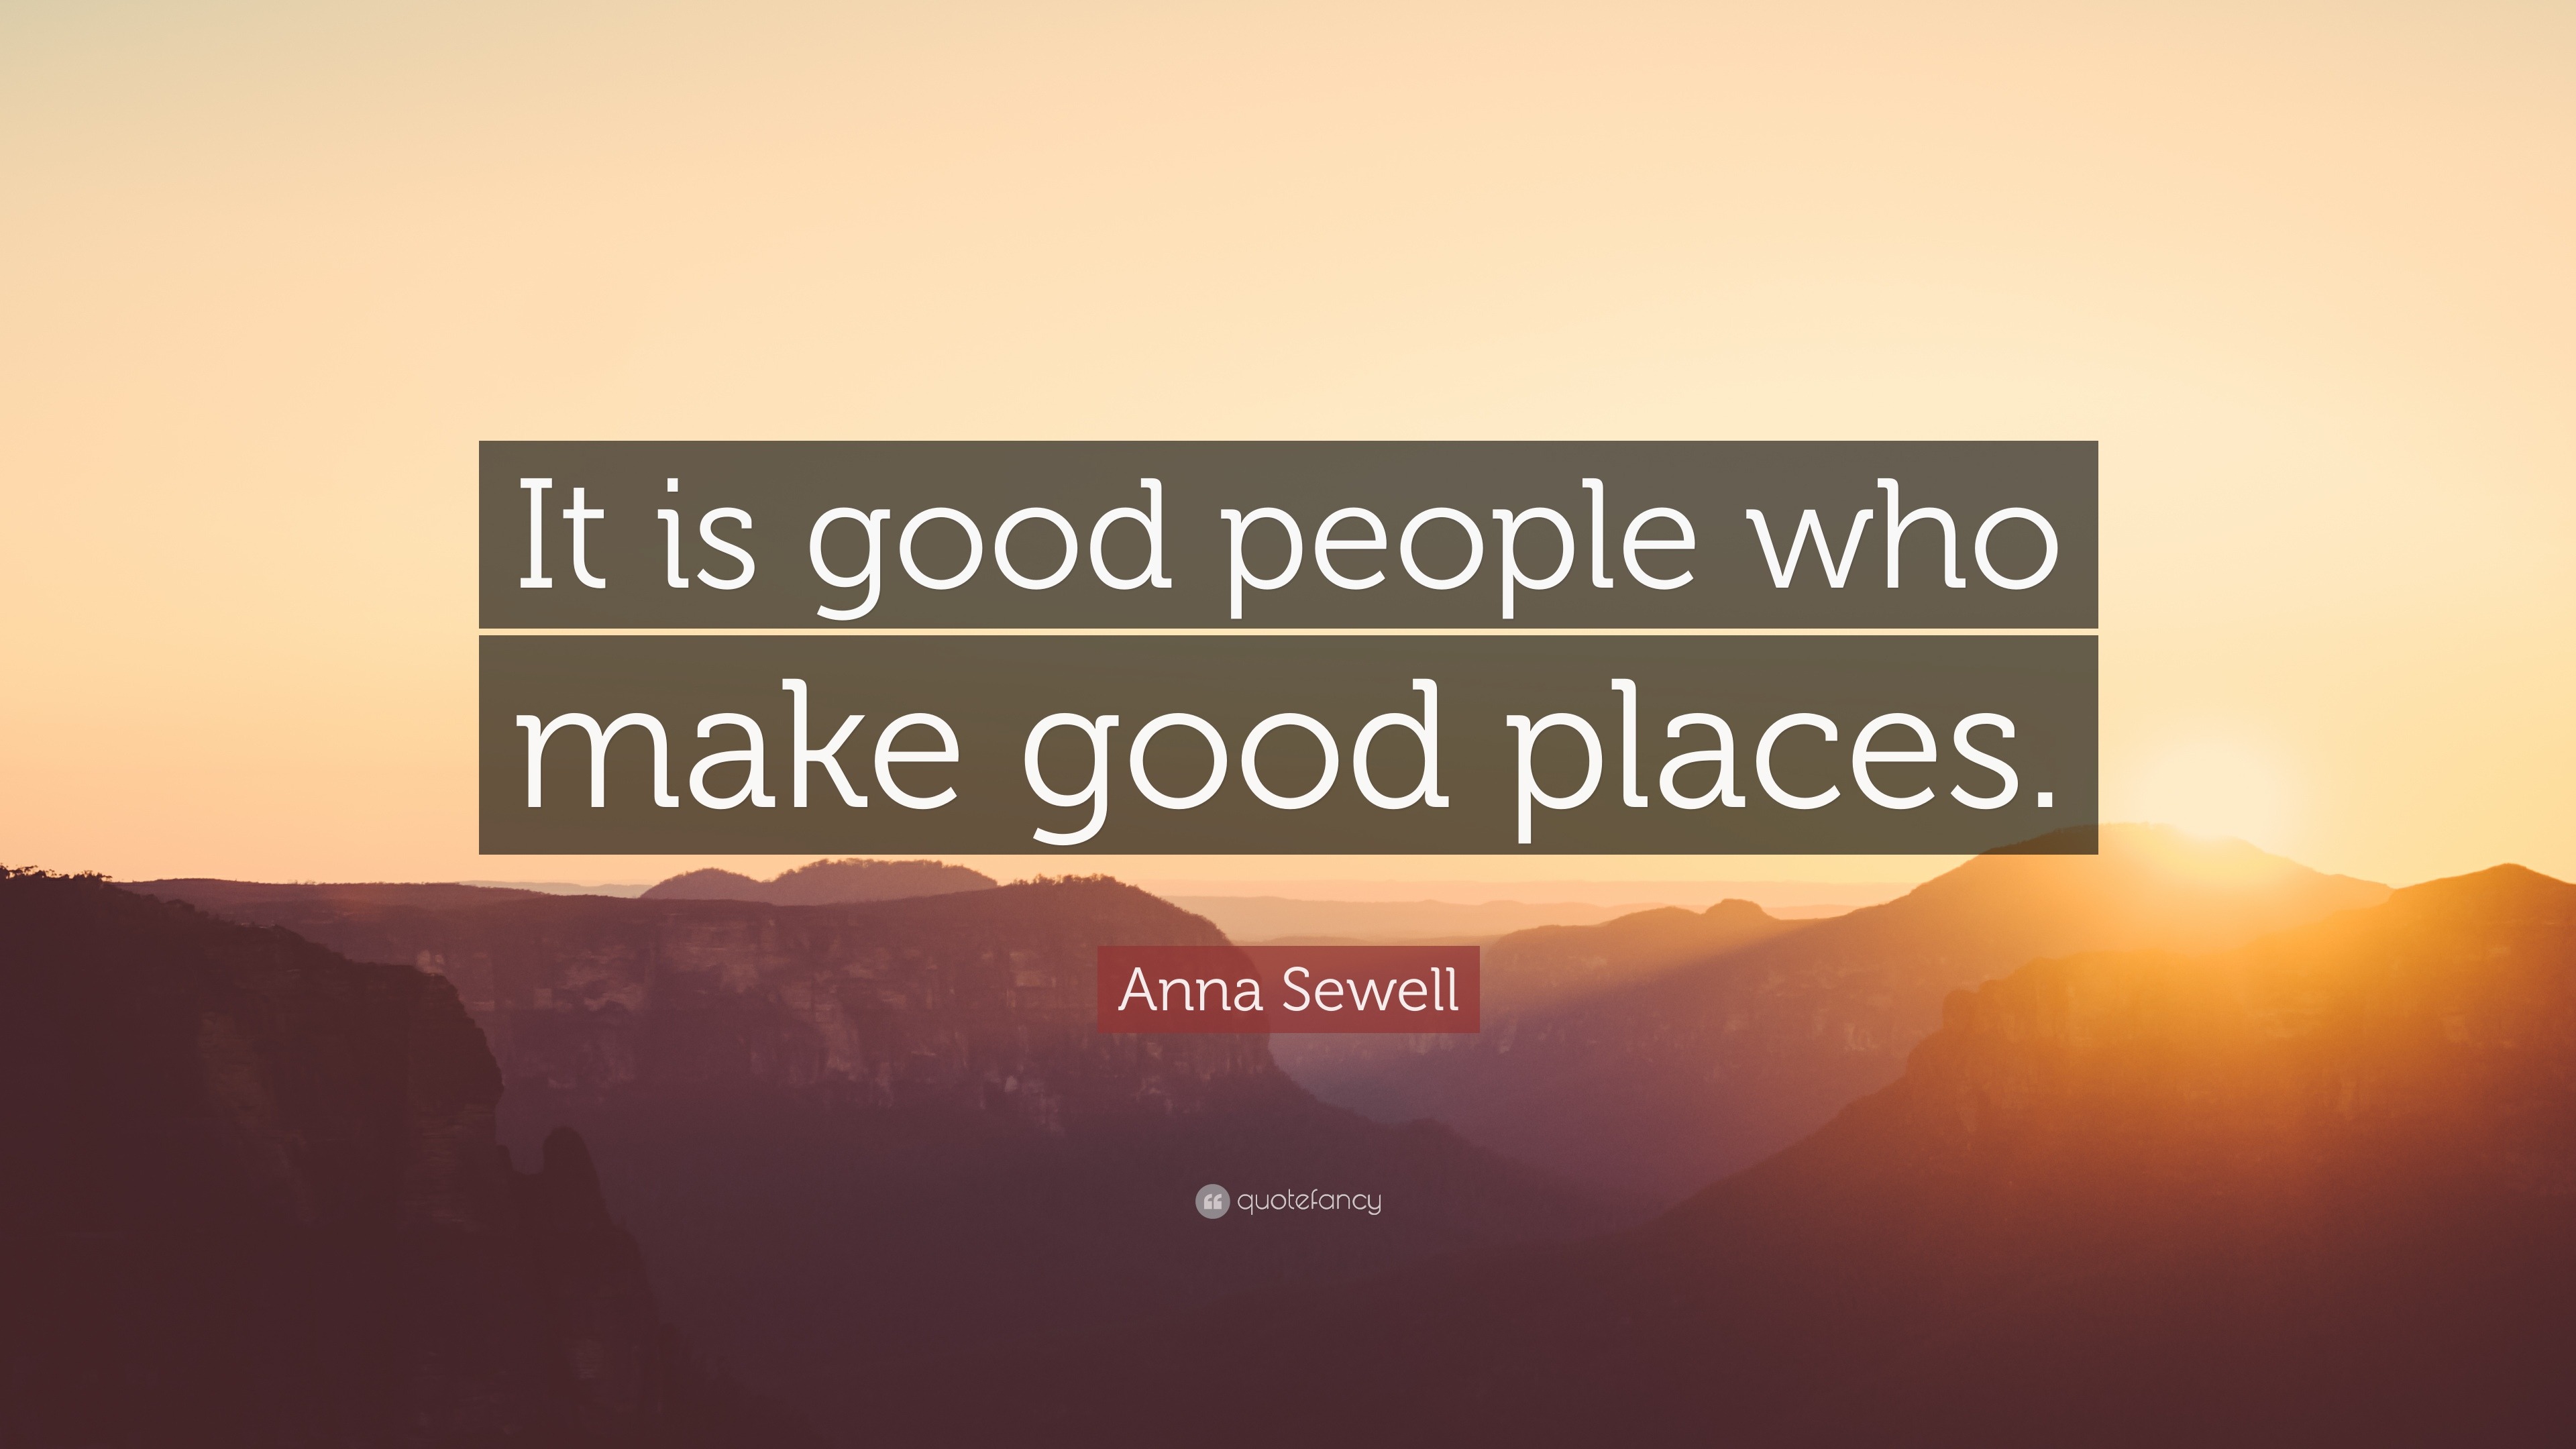 Anna Sewell Quote: “It is good people